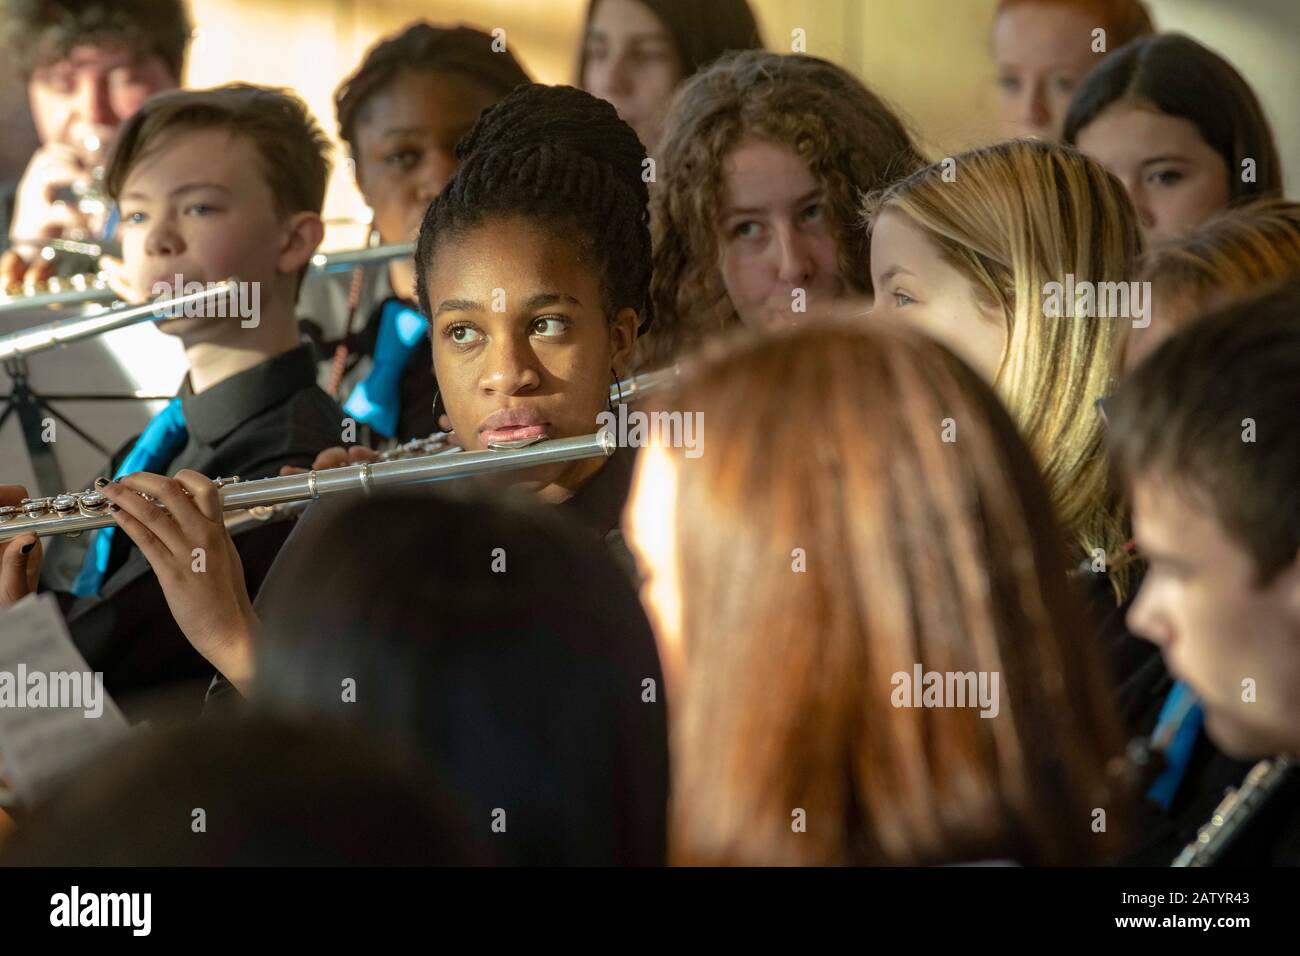 Children and young people playing in youth orchestra Stock Photo